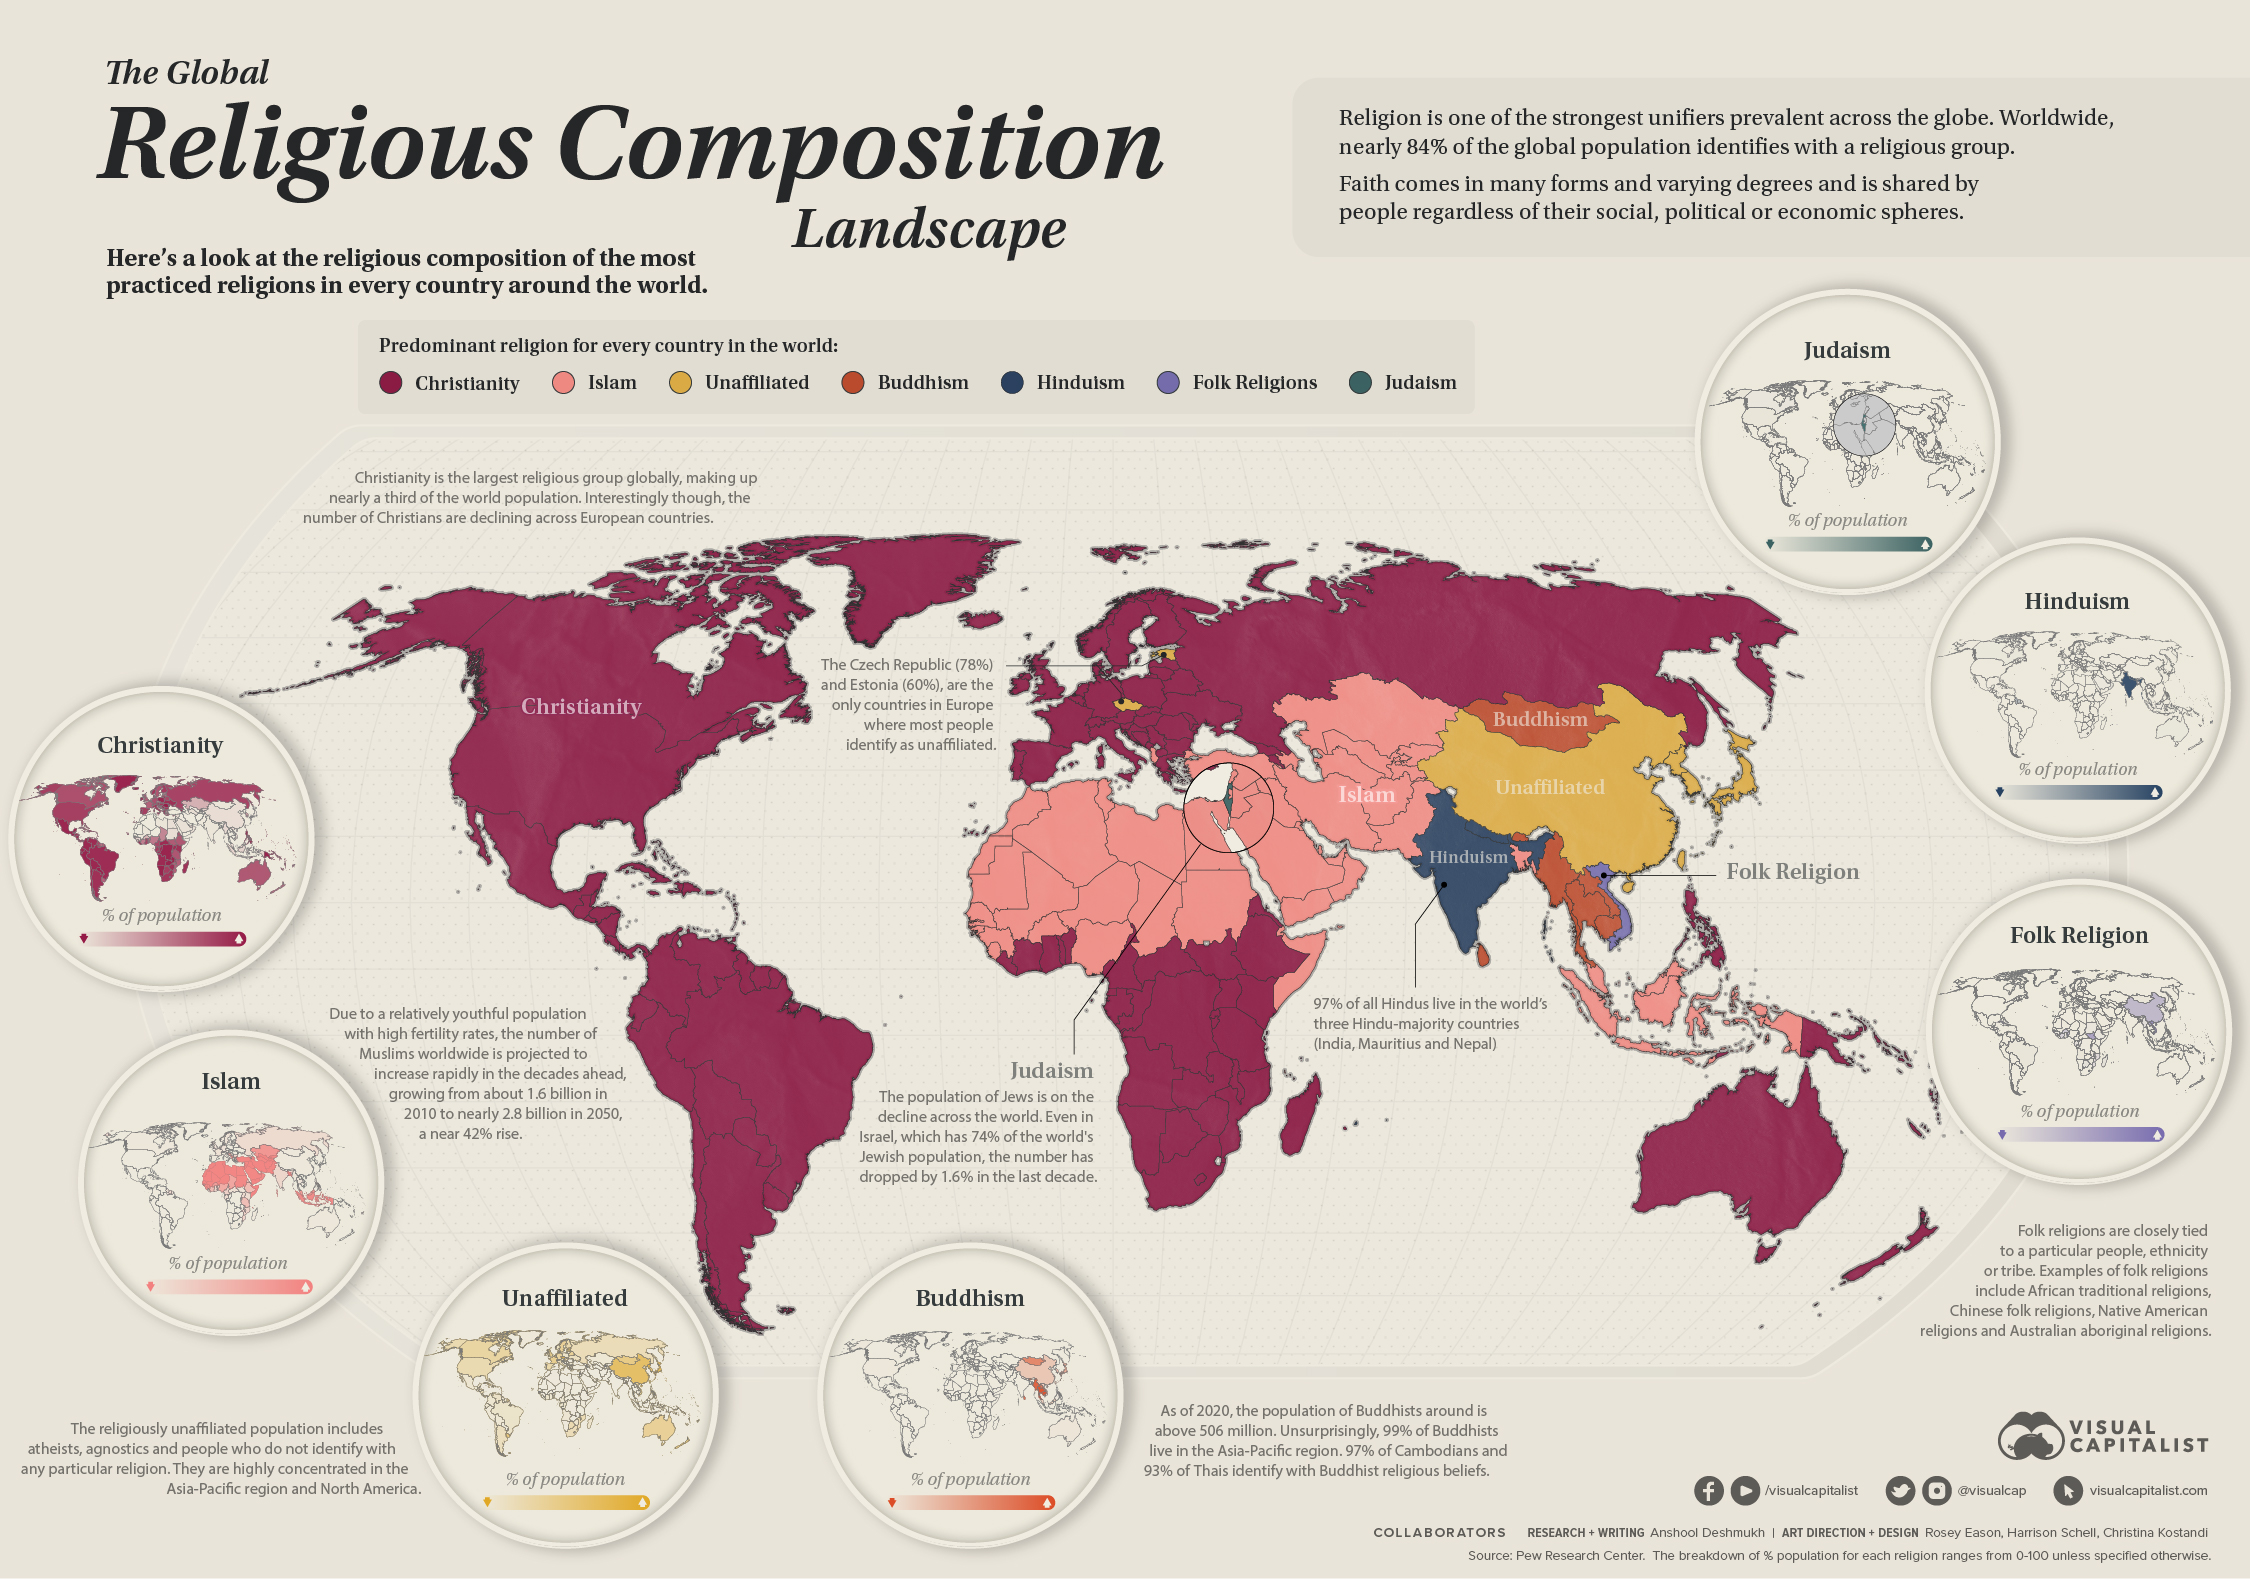 Map of the World's Major Religions